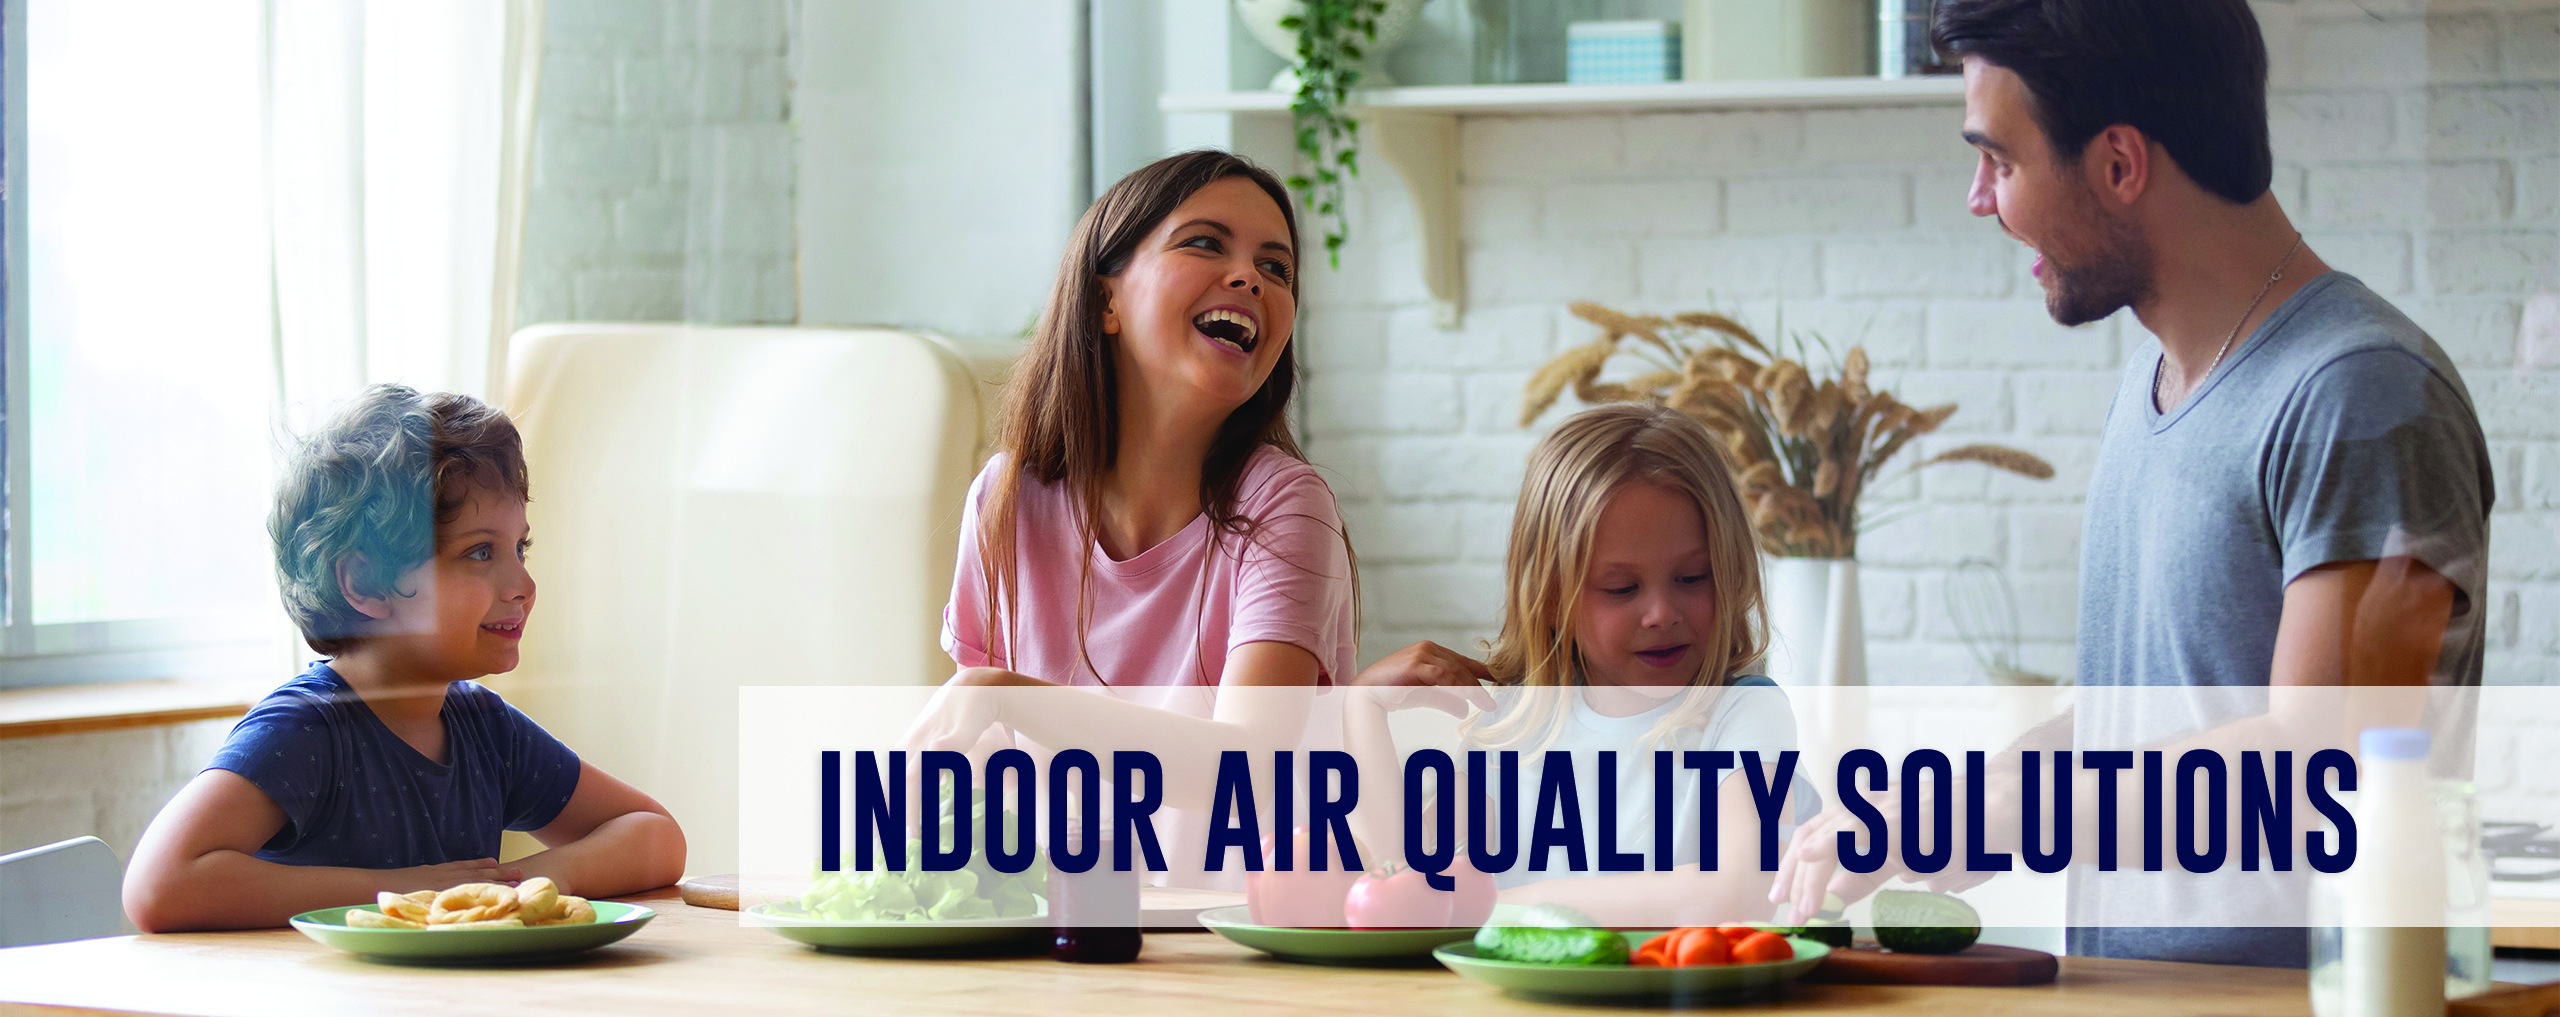 solutions for indoor air quality